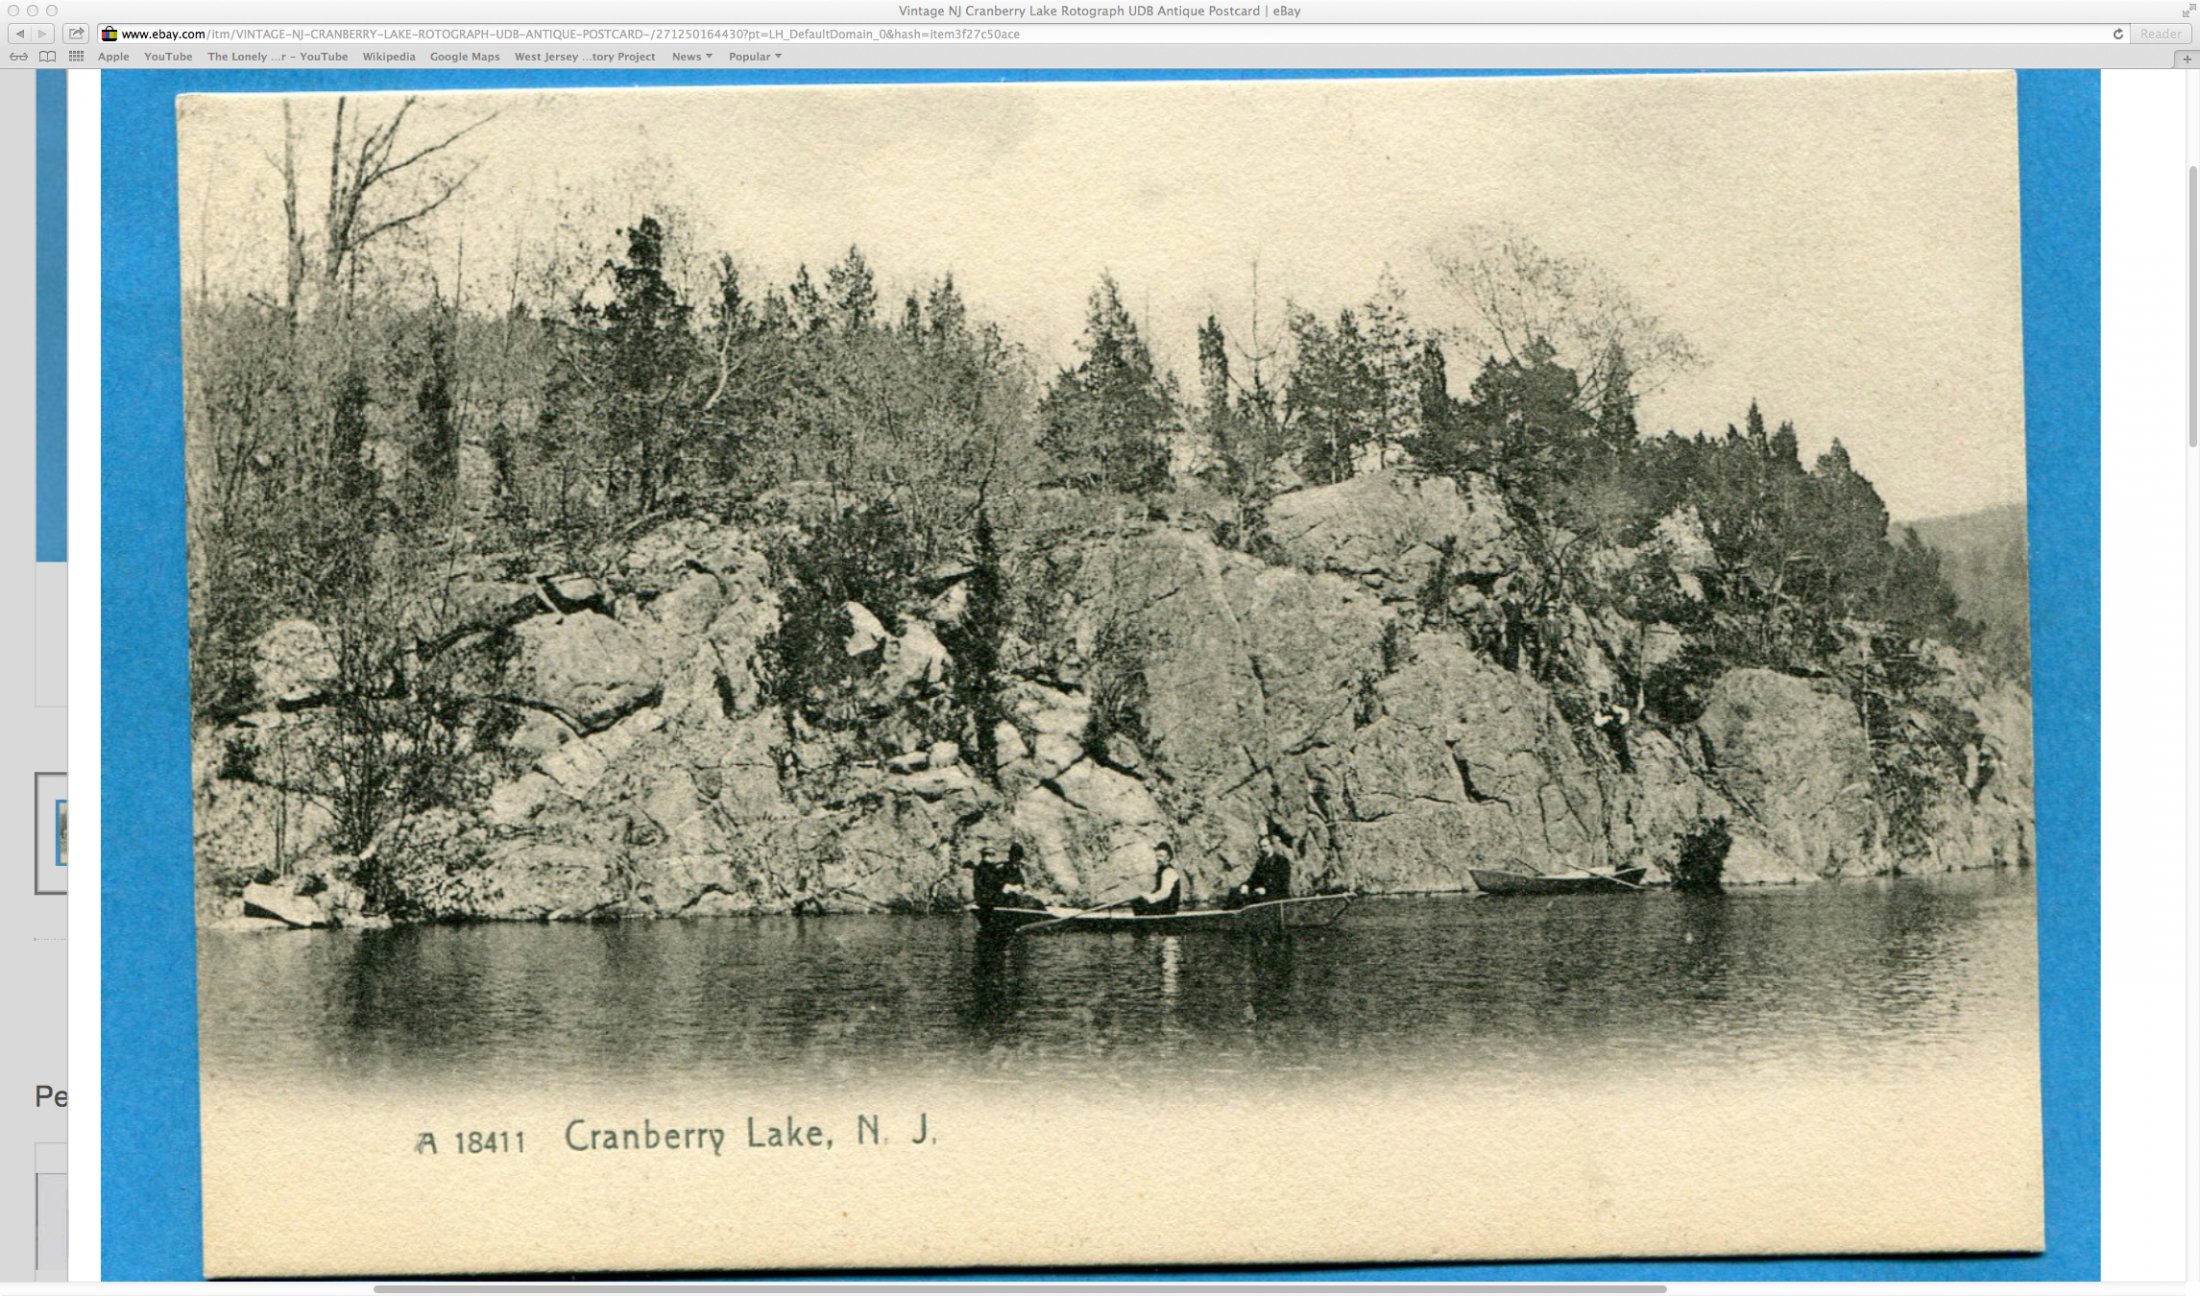 Cranberry Lake 0 A scenic view of water roch conifers and sky 0 c 1910